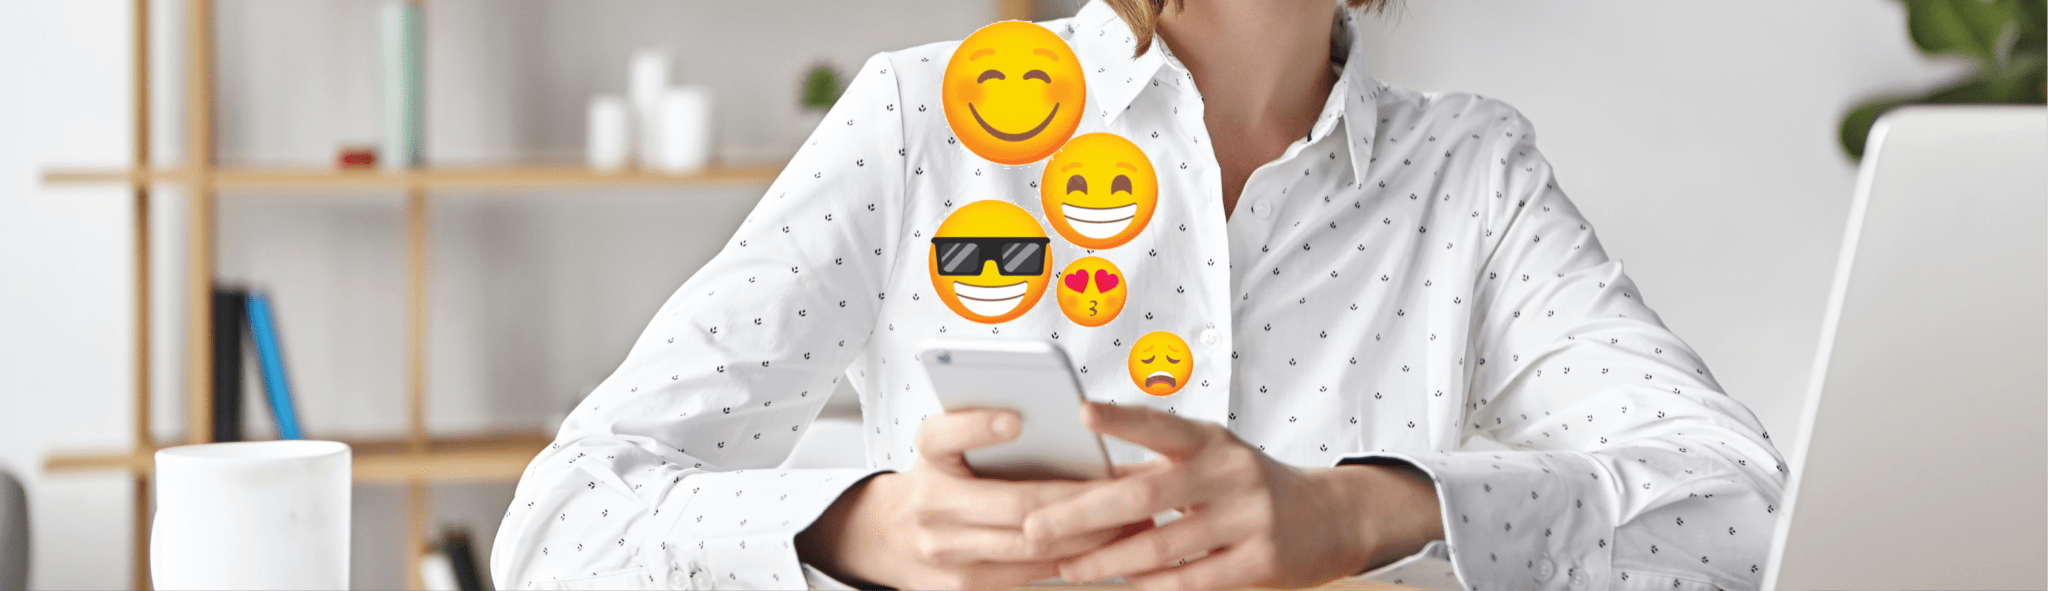 emoji banner with emojis and meaning